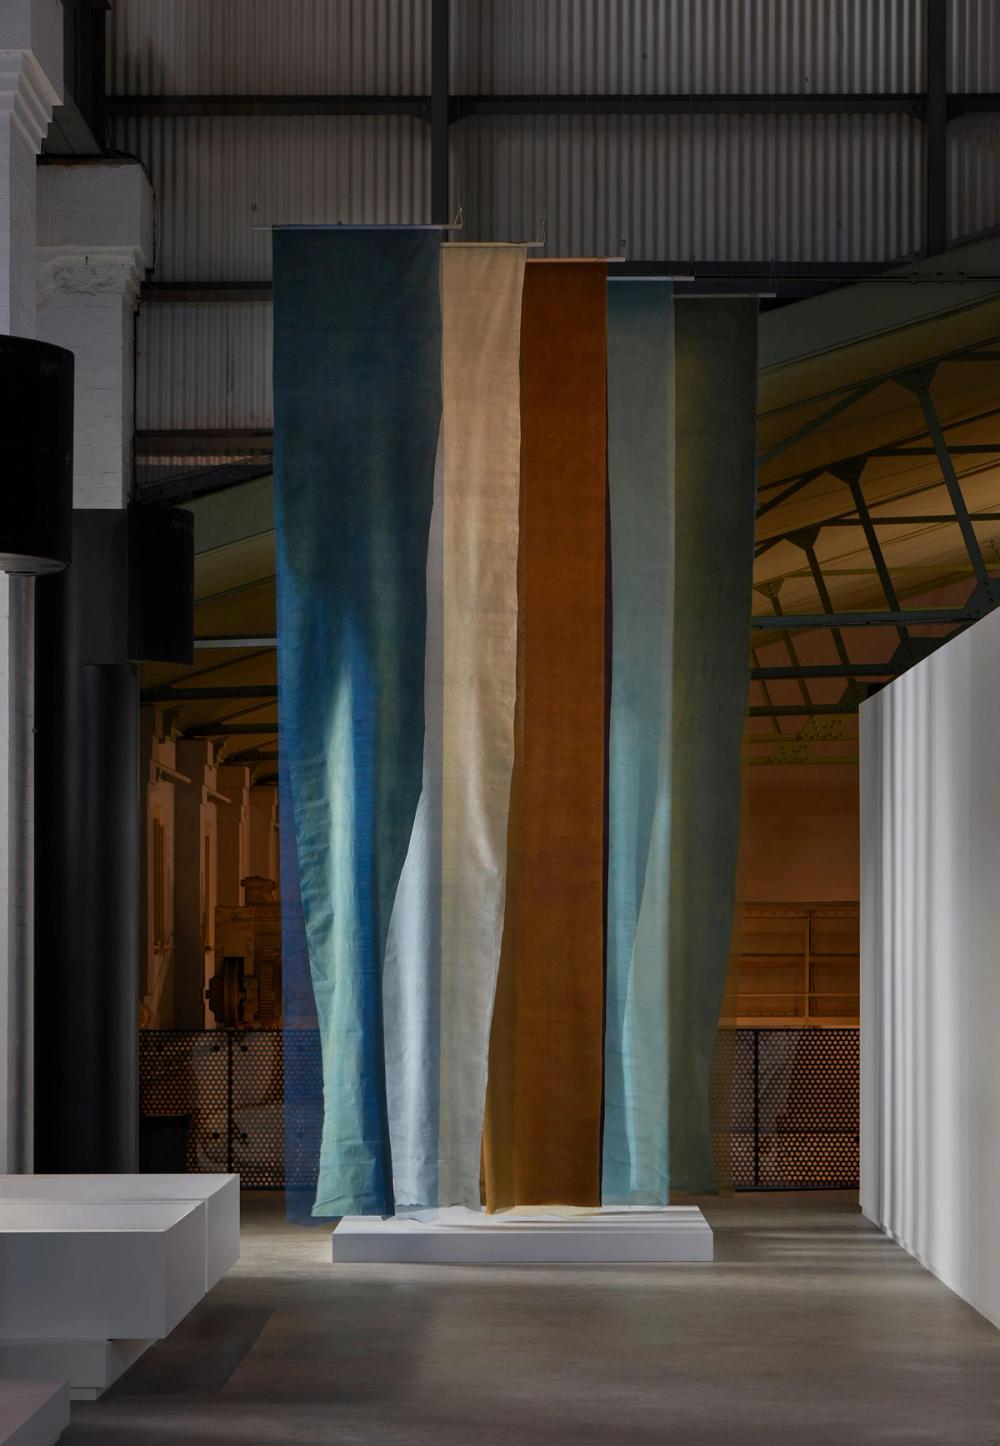 Multiple lengths of textile hang above a low white plinth, the textiles are shades of blue, beige and orange.